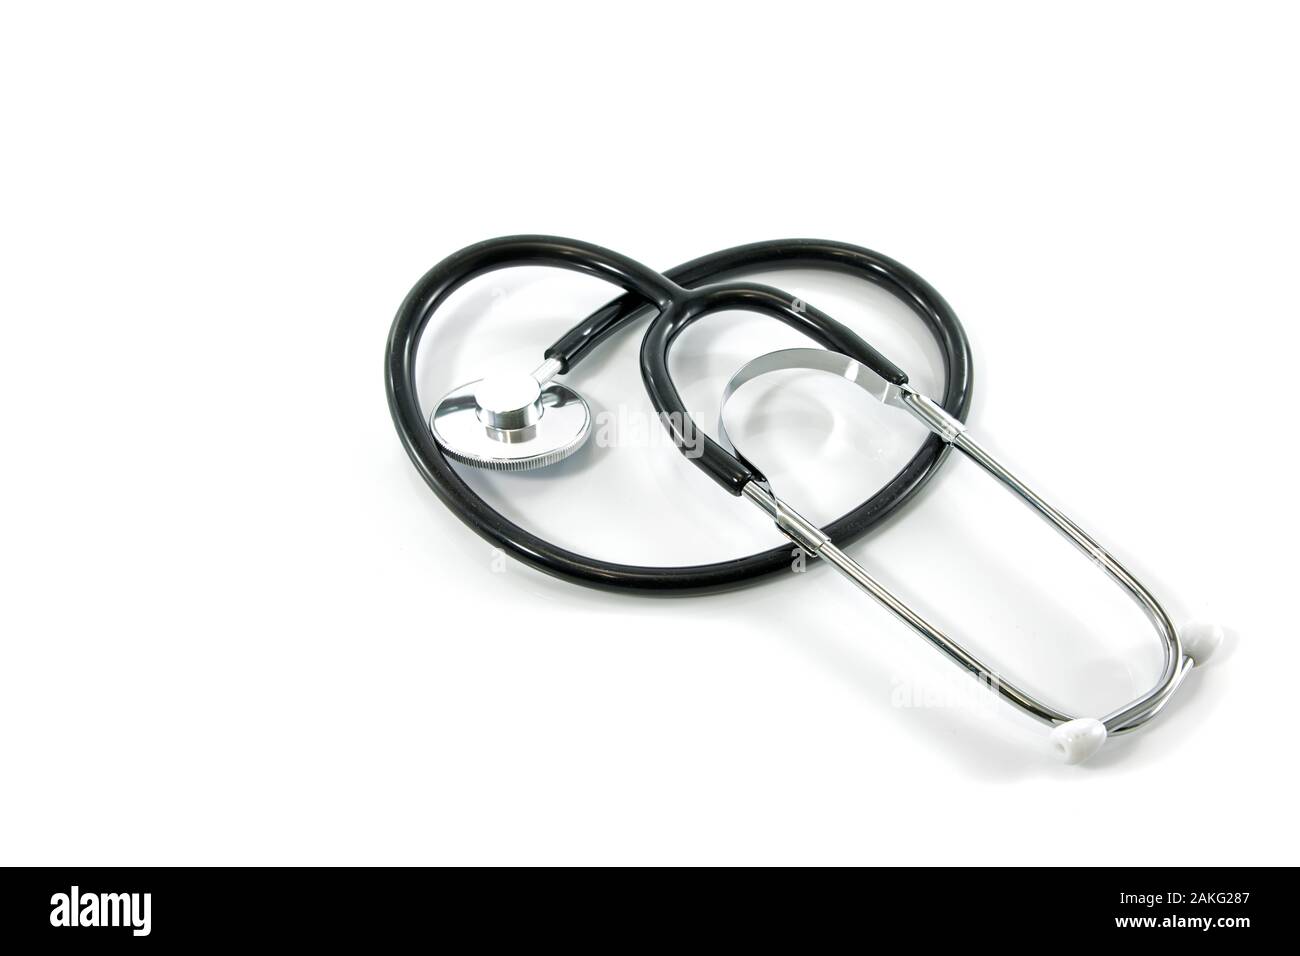 Stethoscope curved into the shape of a heart on white background Stock Photo